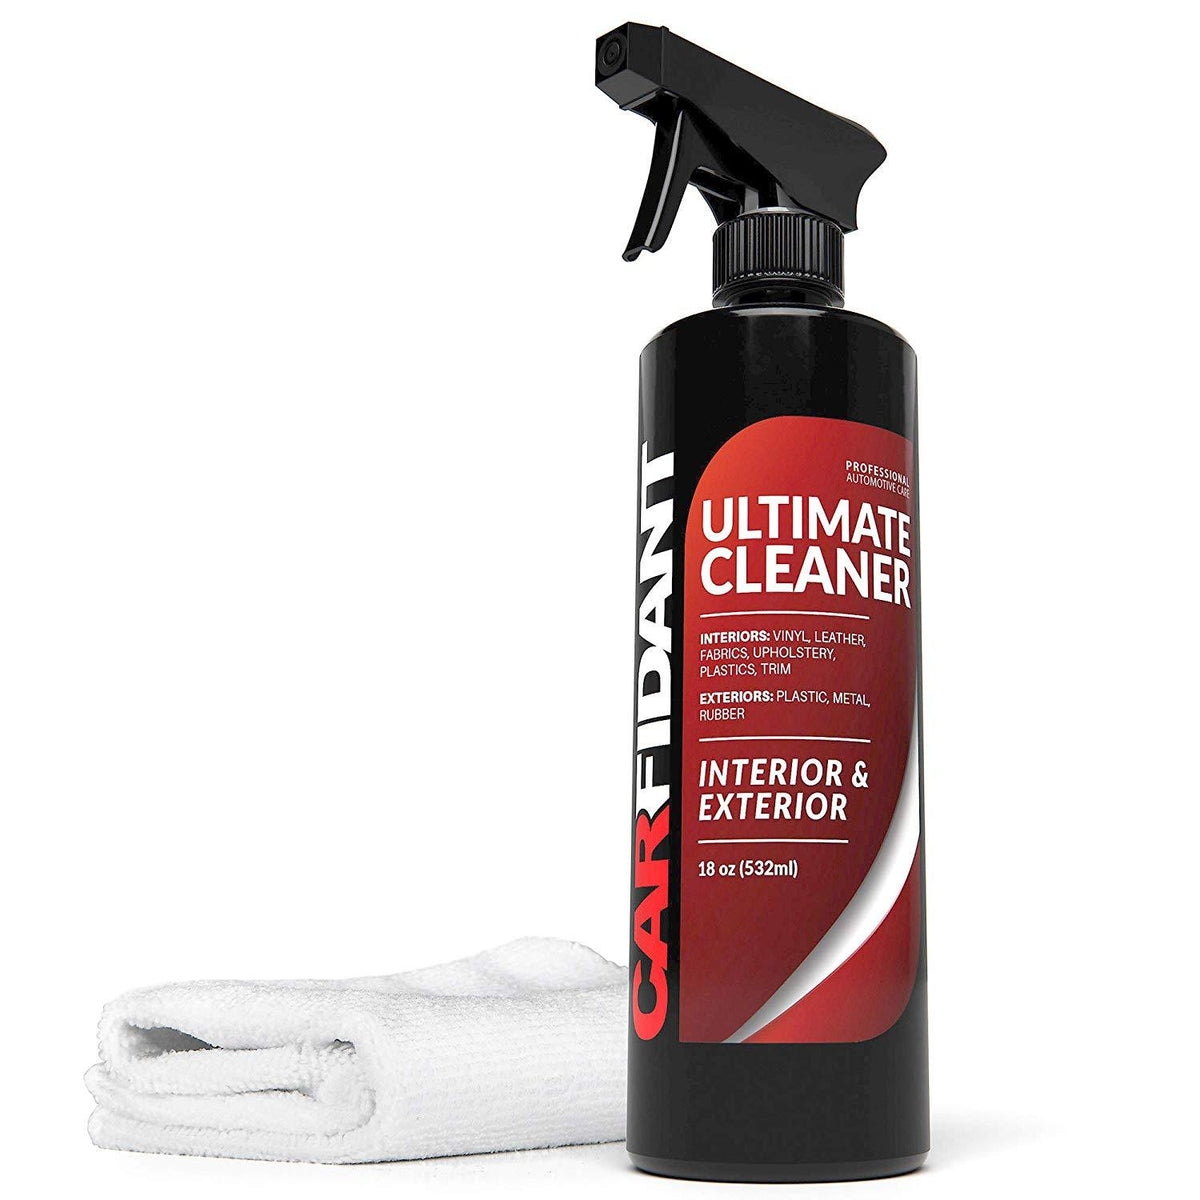 Car Guys Super Cleaner - Effective Car Interior Cleaner - Best for  Detailing Carpet Leather Upholstery Fabric Vinyl